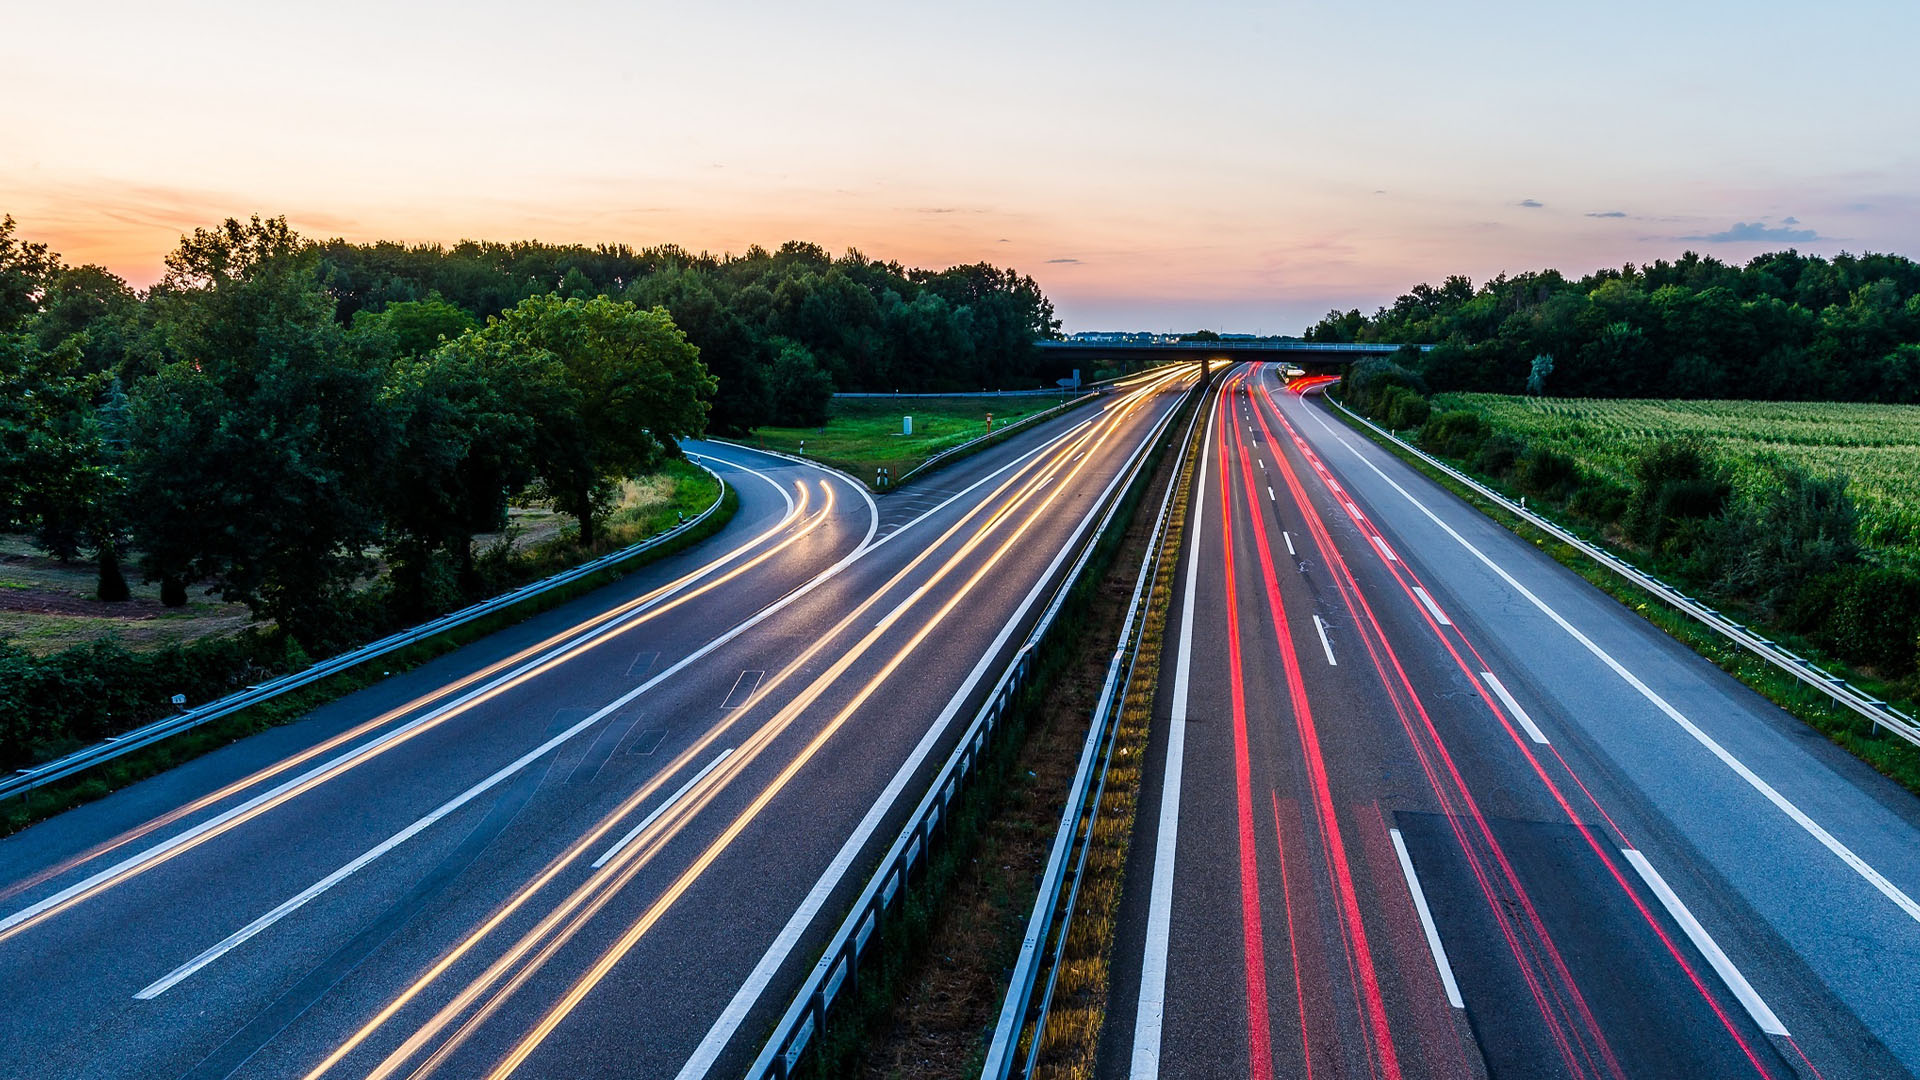 EU Vehicle Data Consultation and the Evolving EU Regulatory Landscape for Connected Vehicles